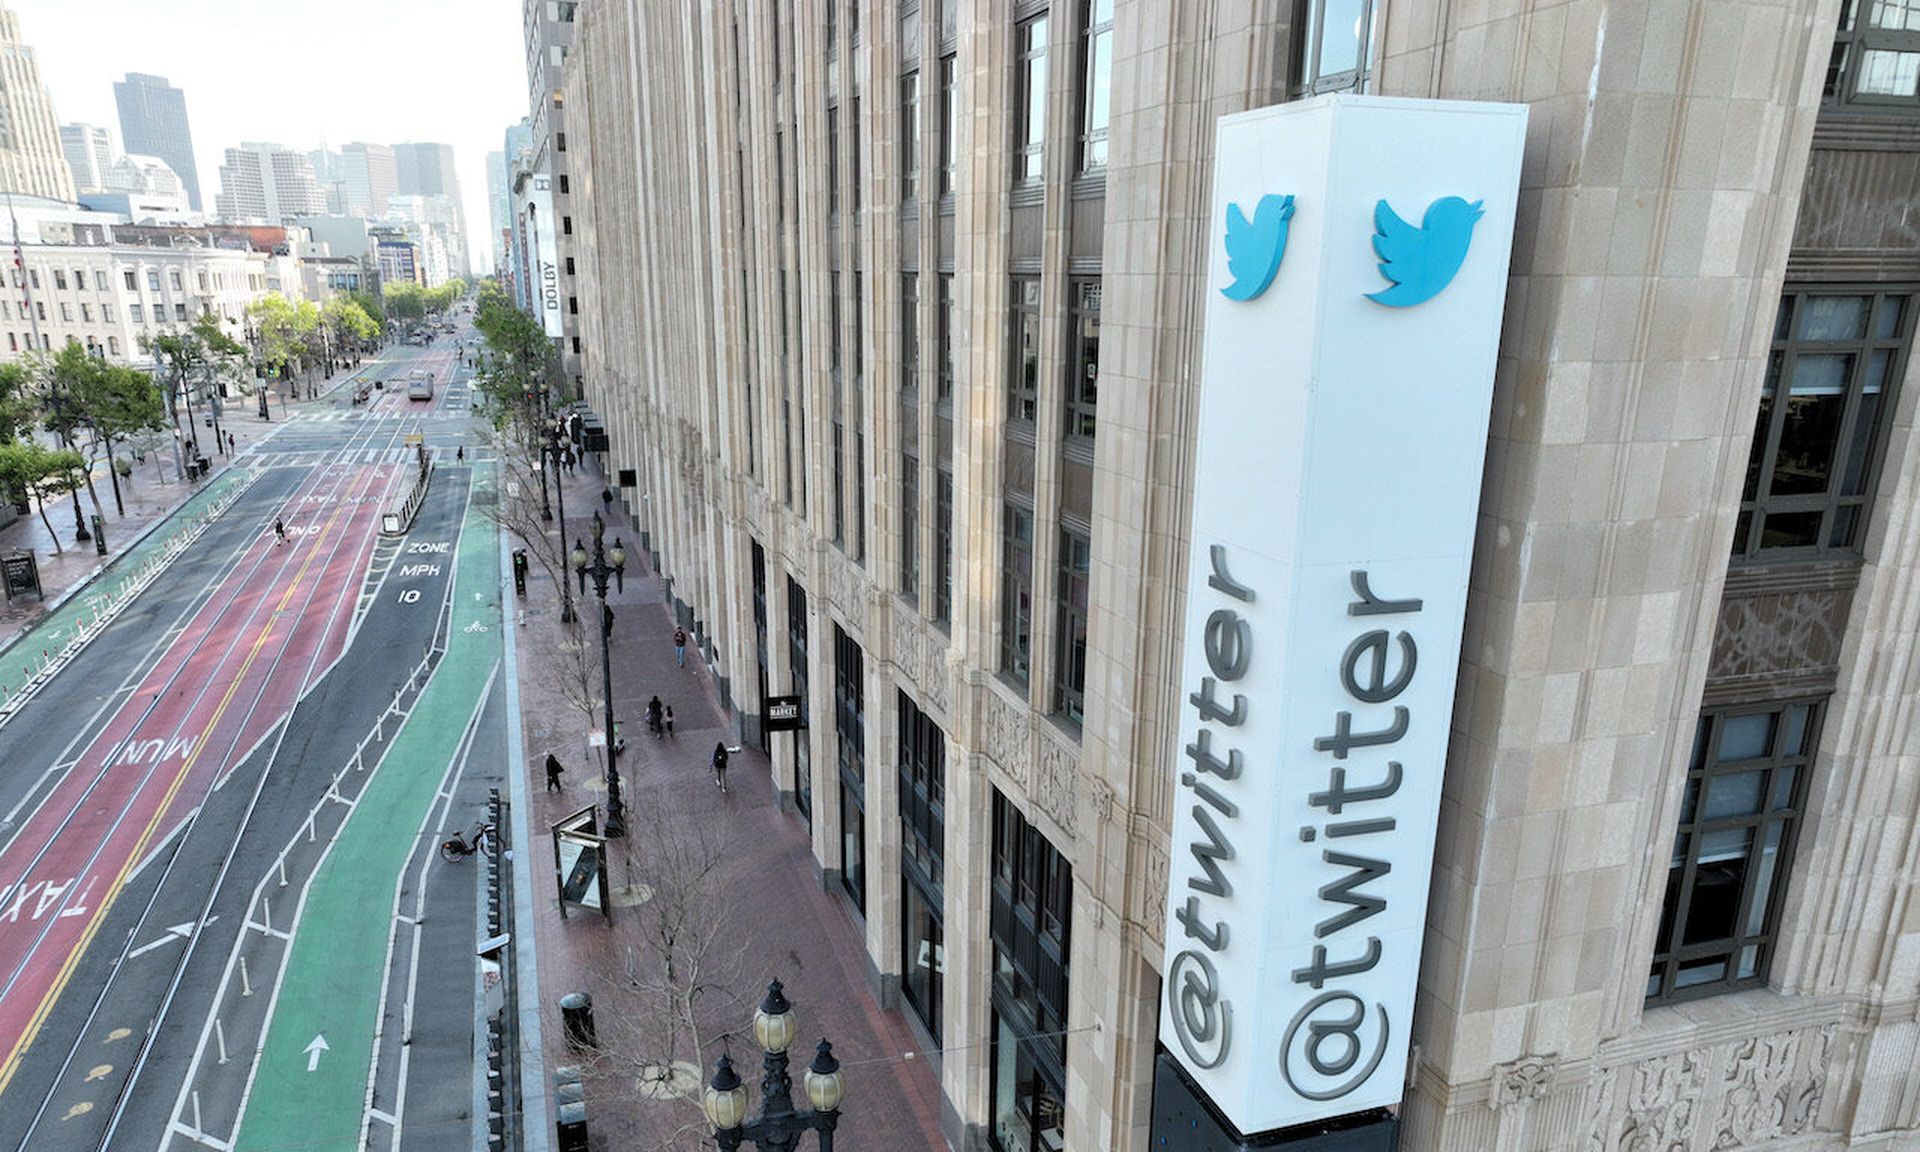 Today’s columnist, Doron Kapah of Cyberint, points out that the threat actors behind Industrial Spy may use Twitter accounts to publicize their offerings. (Photo by Justin Sullivan/Getty Images)